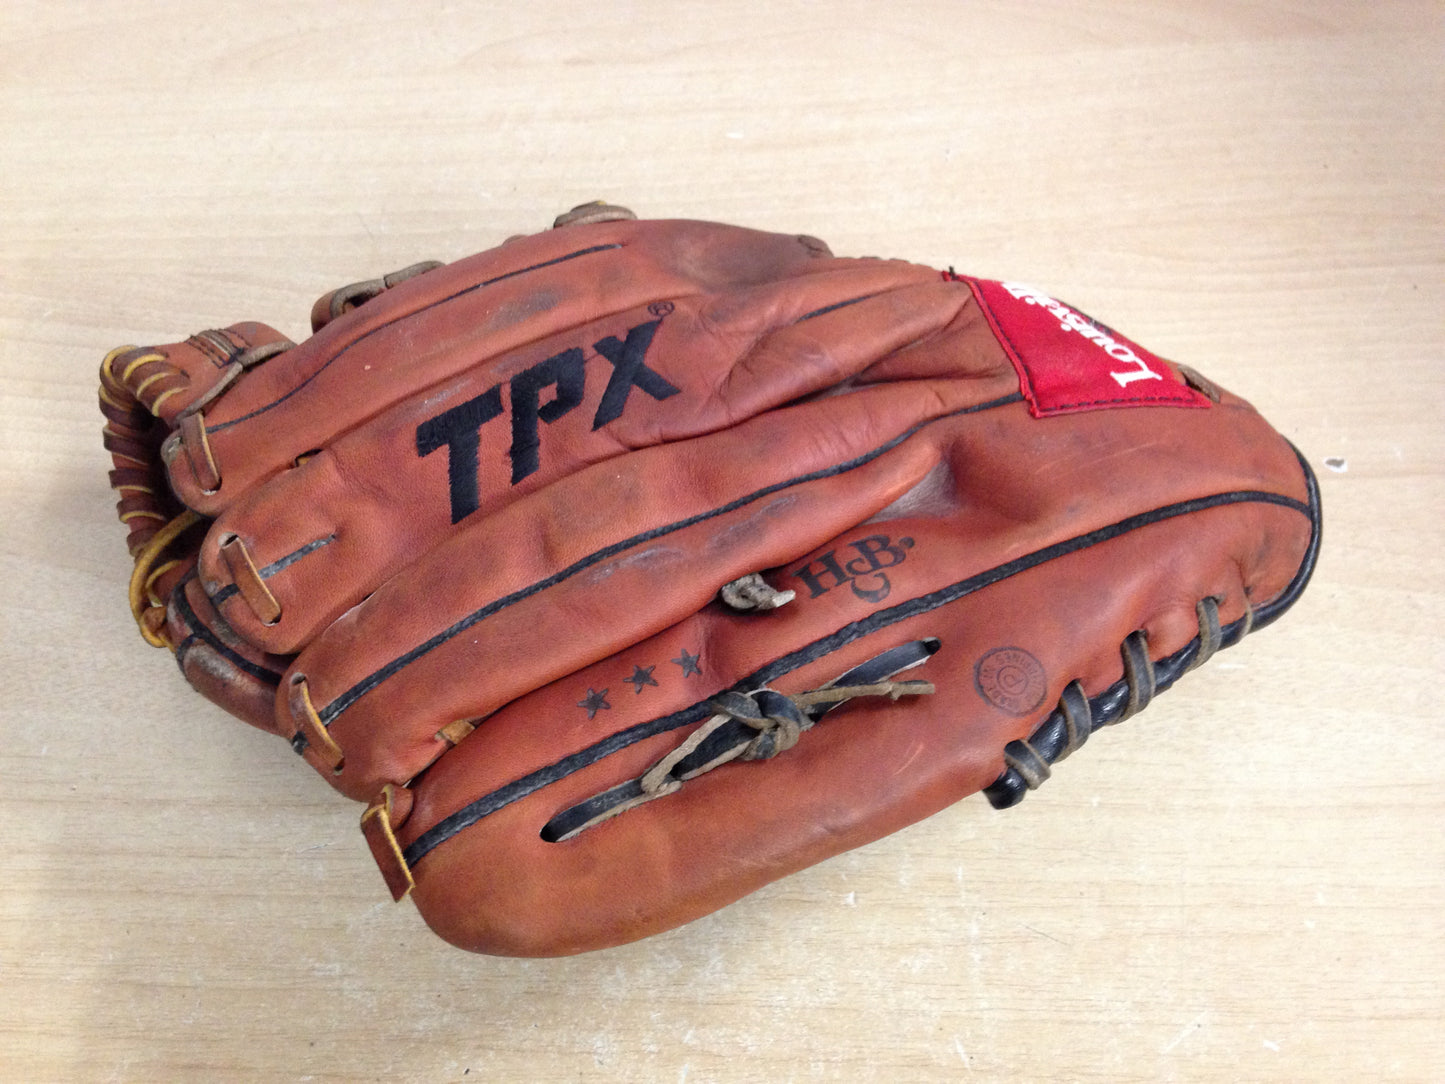 Baseball Glove Adult Size 11.5 inch Louisville TPX Brown Leather  Fits on Left Hand